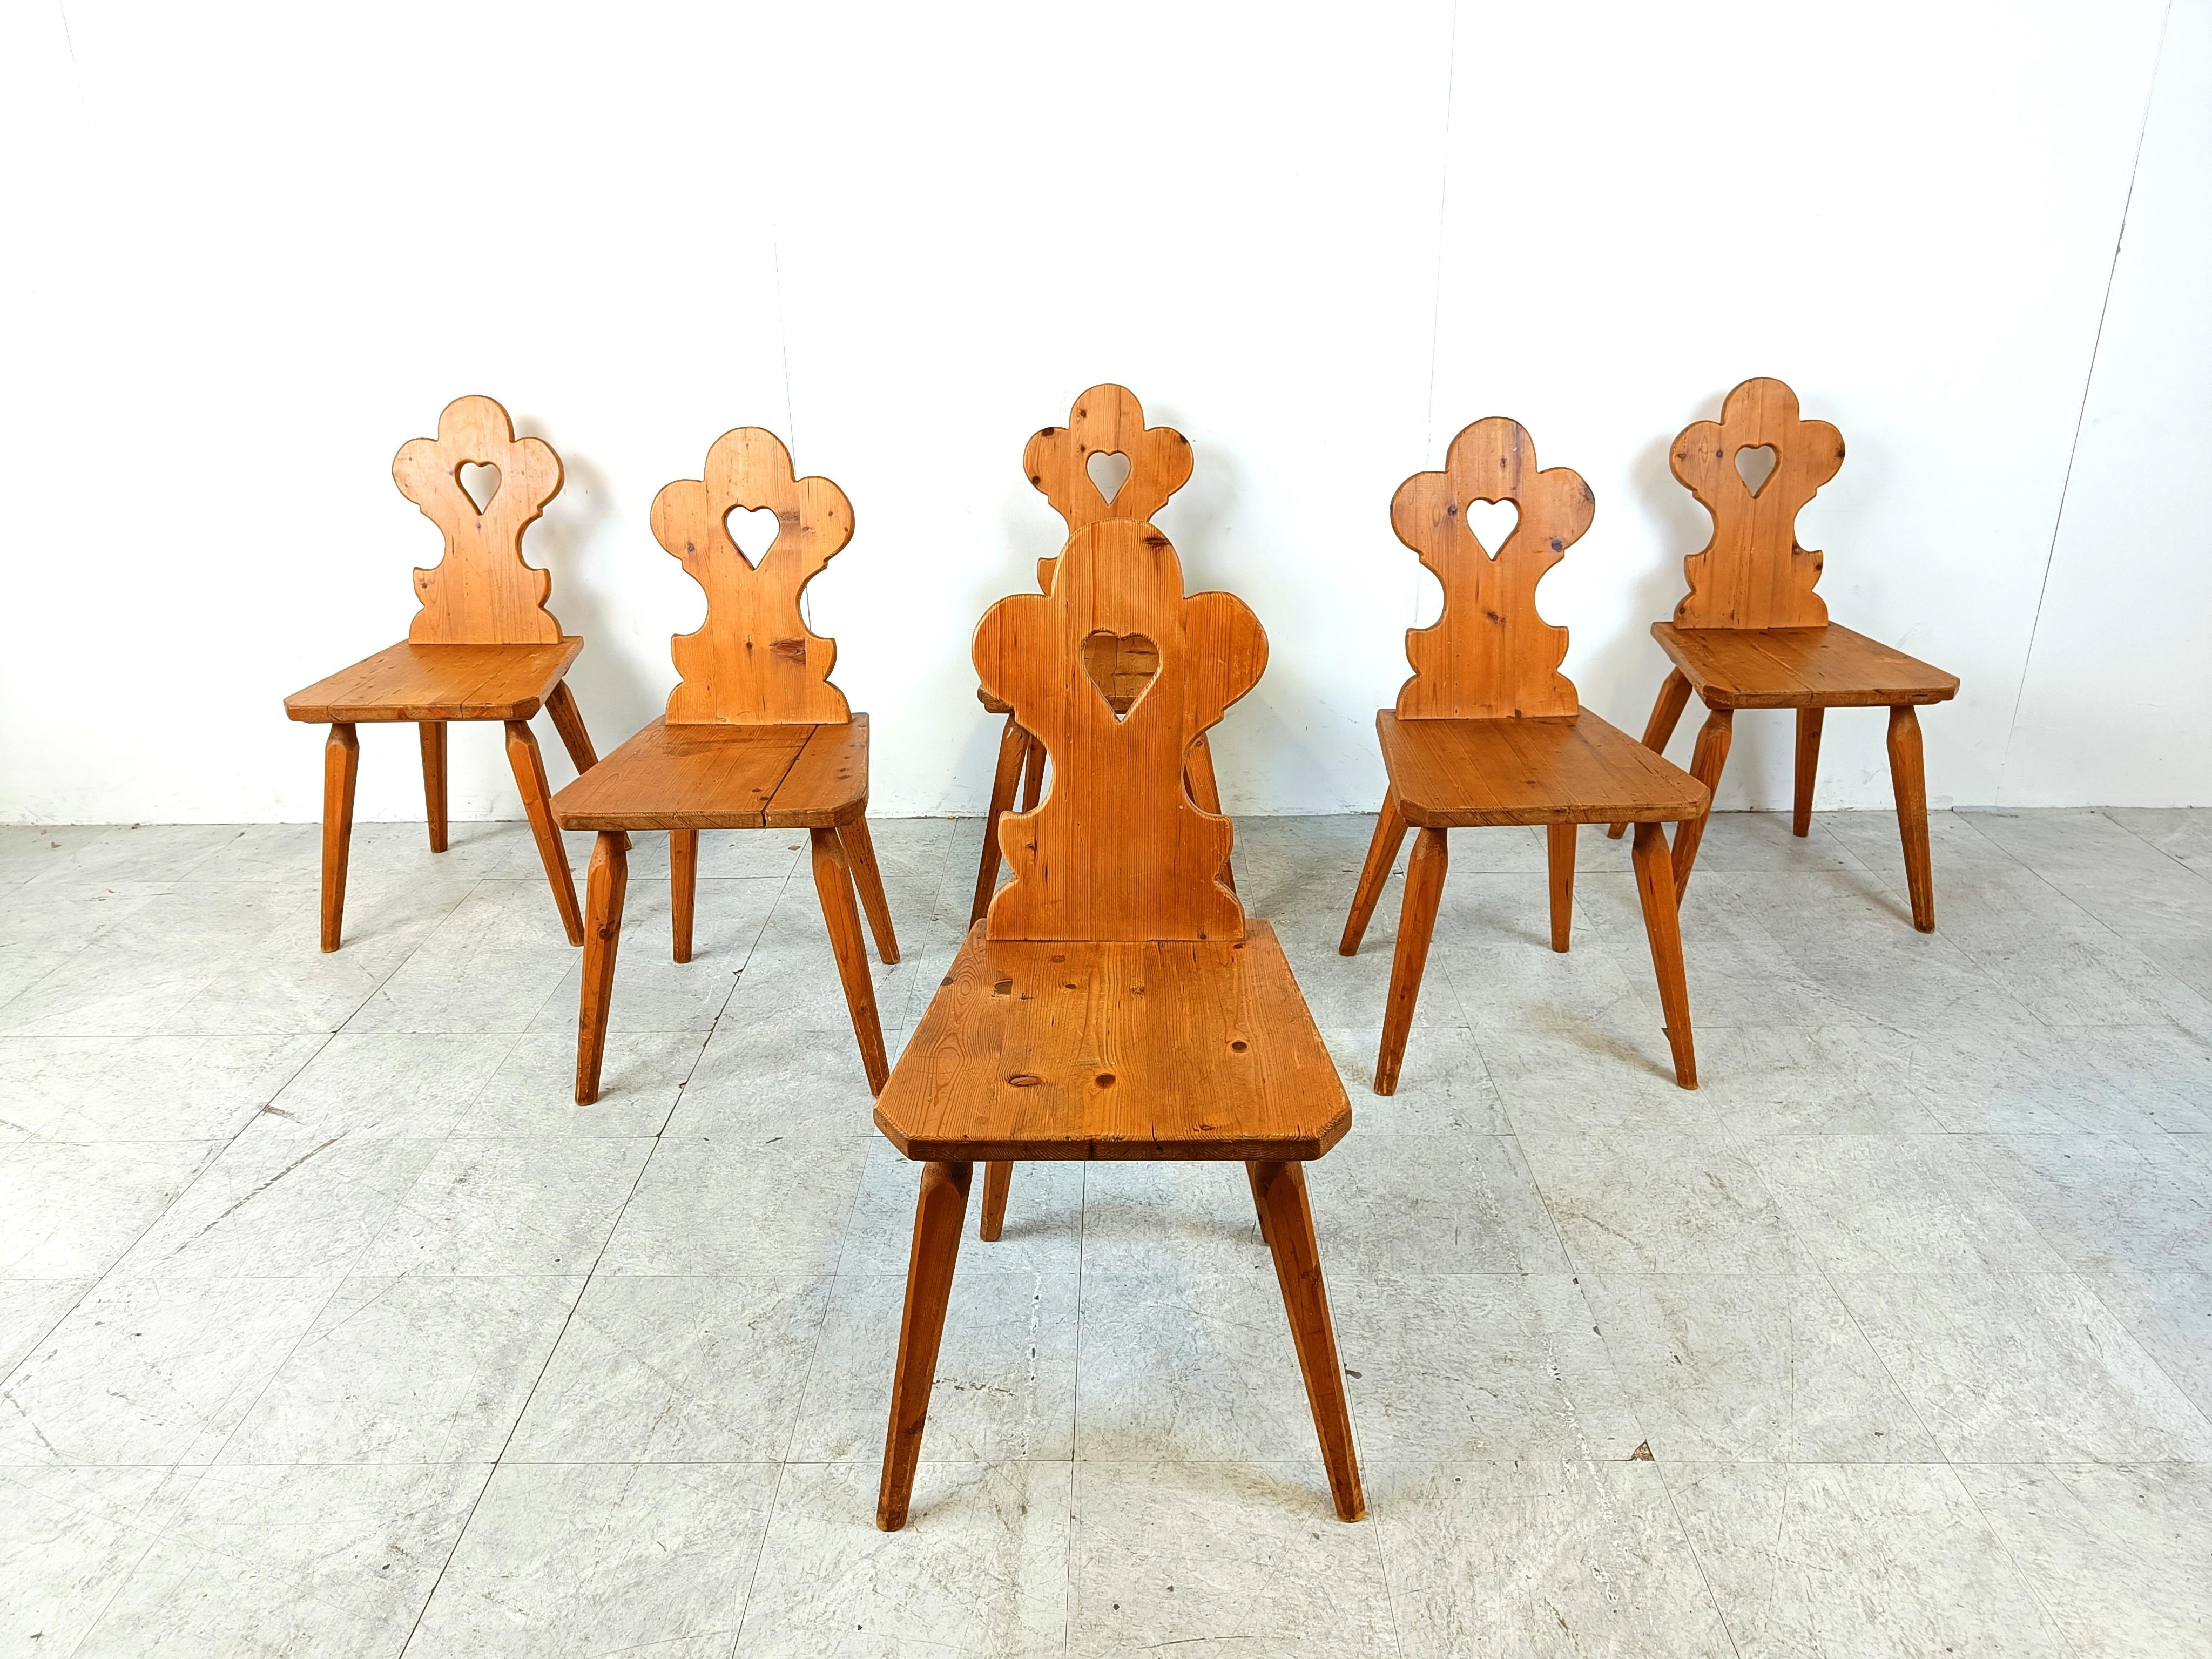 Rustic Vintage swedish folk art chairs, 1960s For Sale